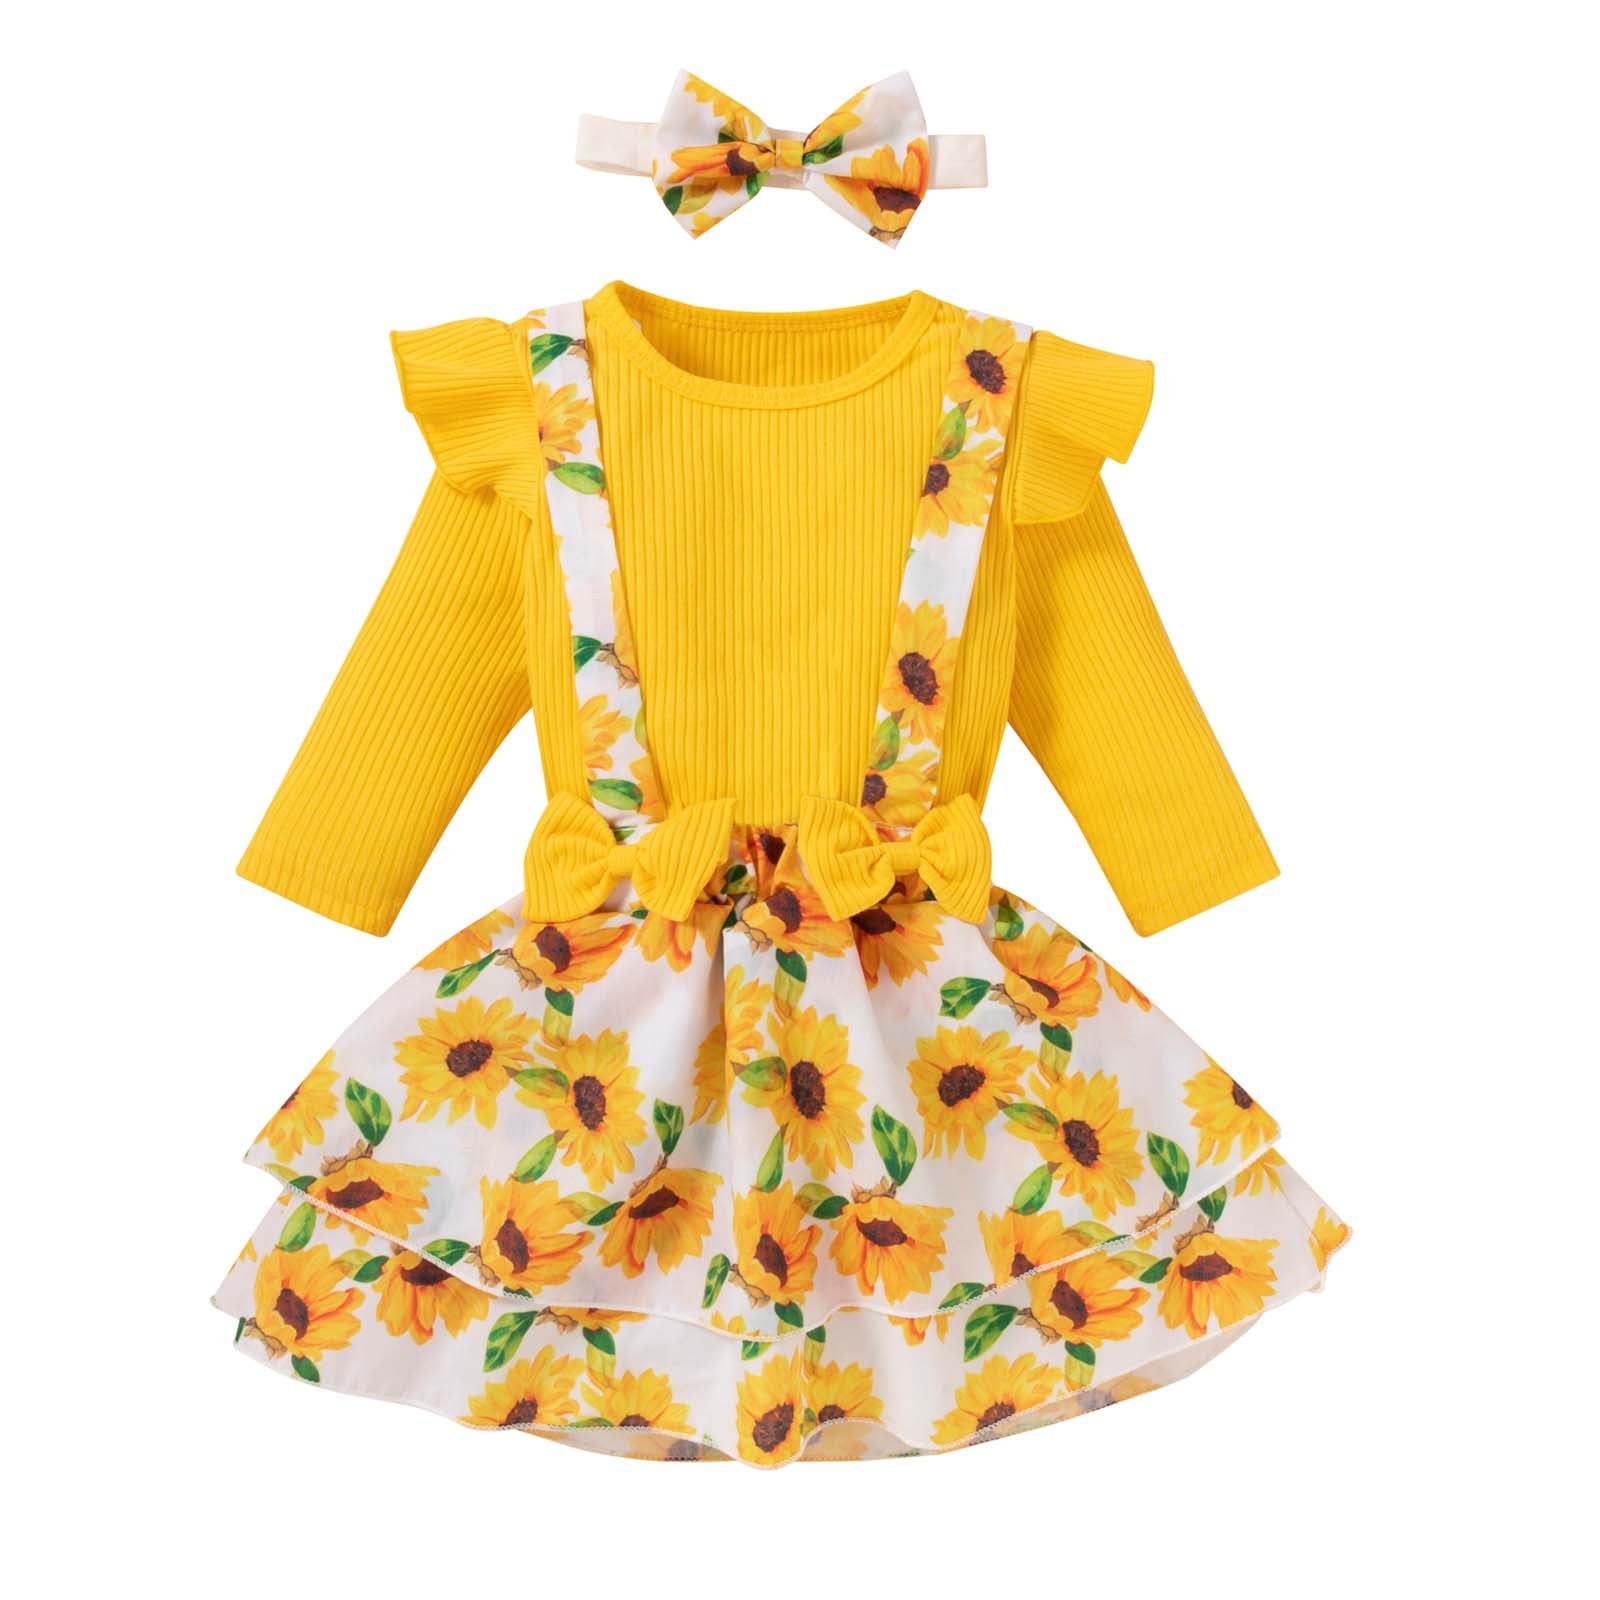 NEW Boutique Farm Chicken Girls Yellow Ruffle Dress Headband Bow Outfit Easter